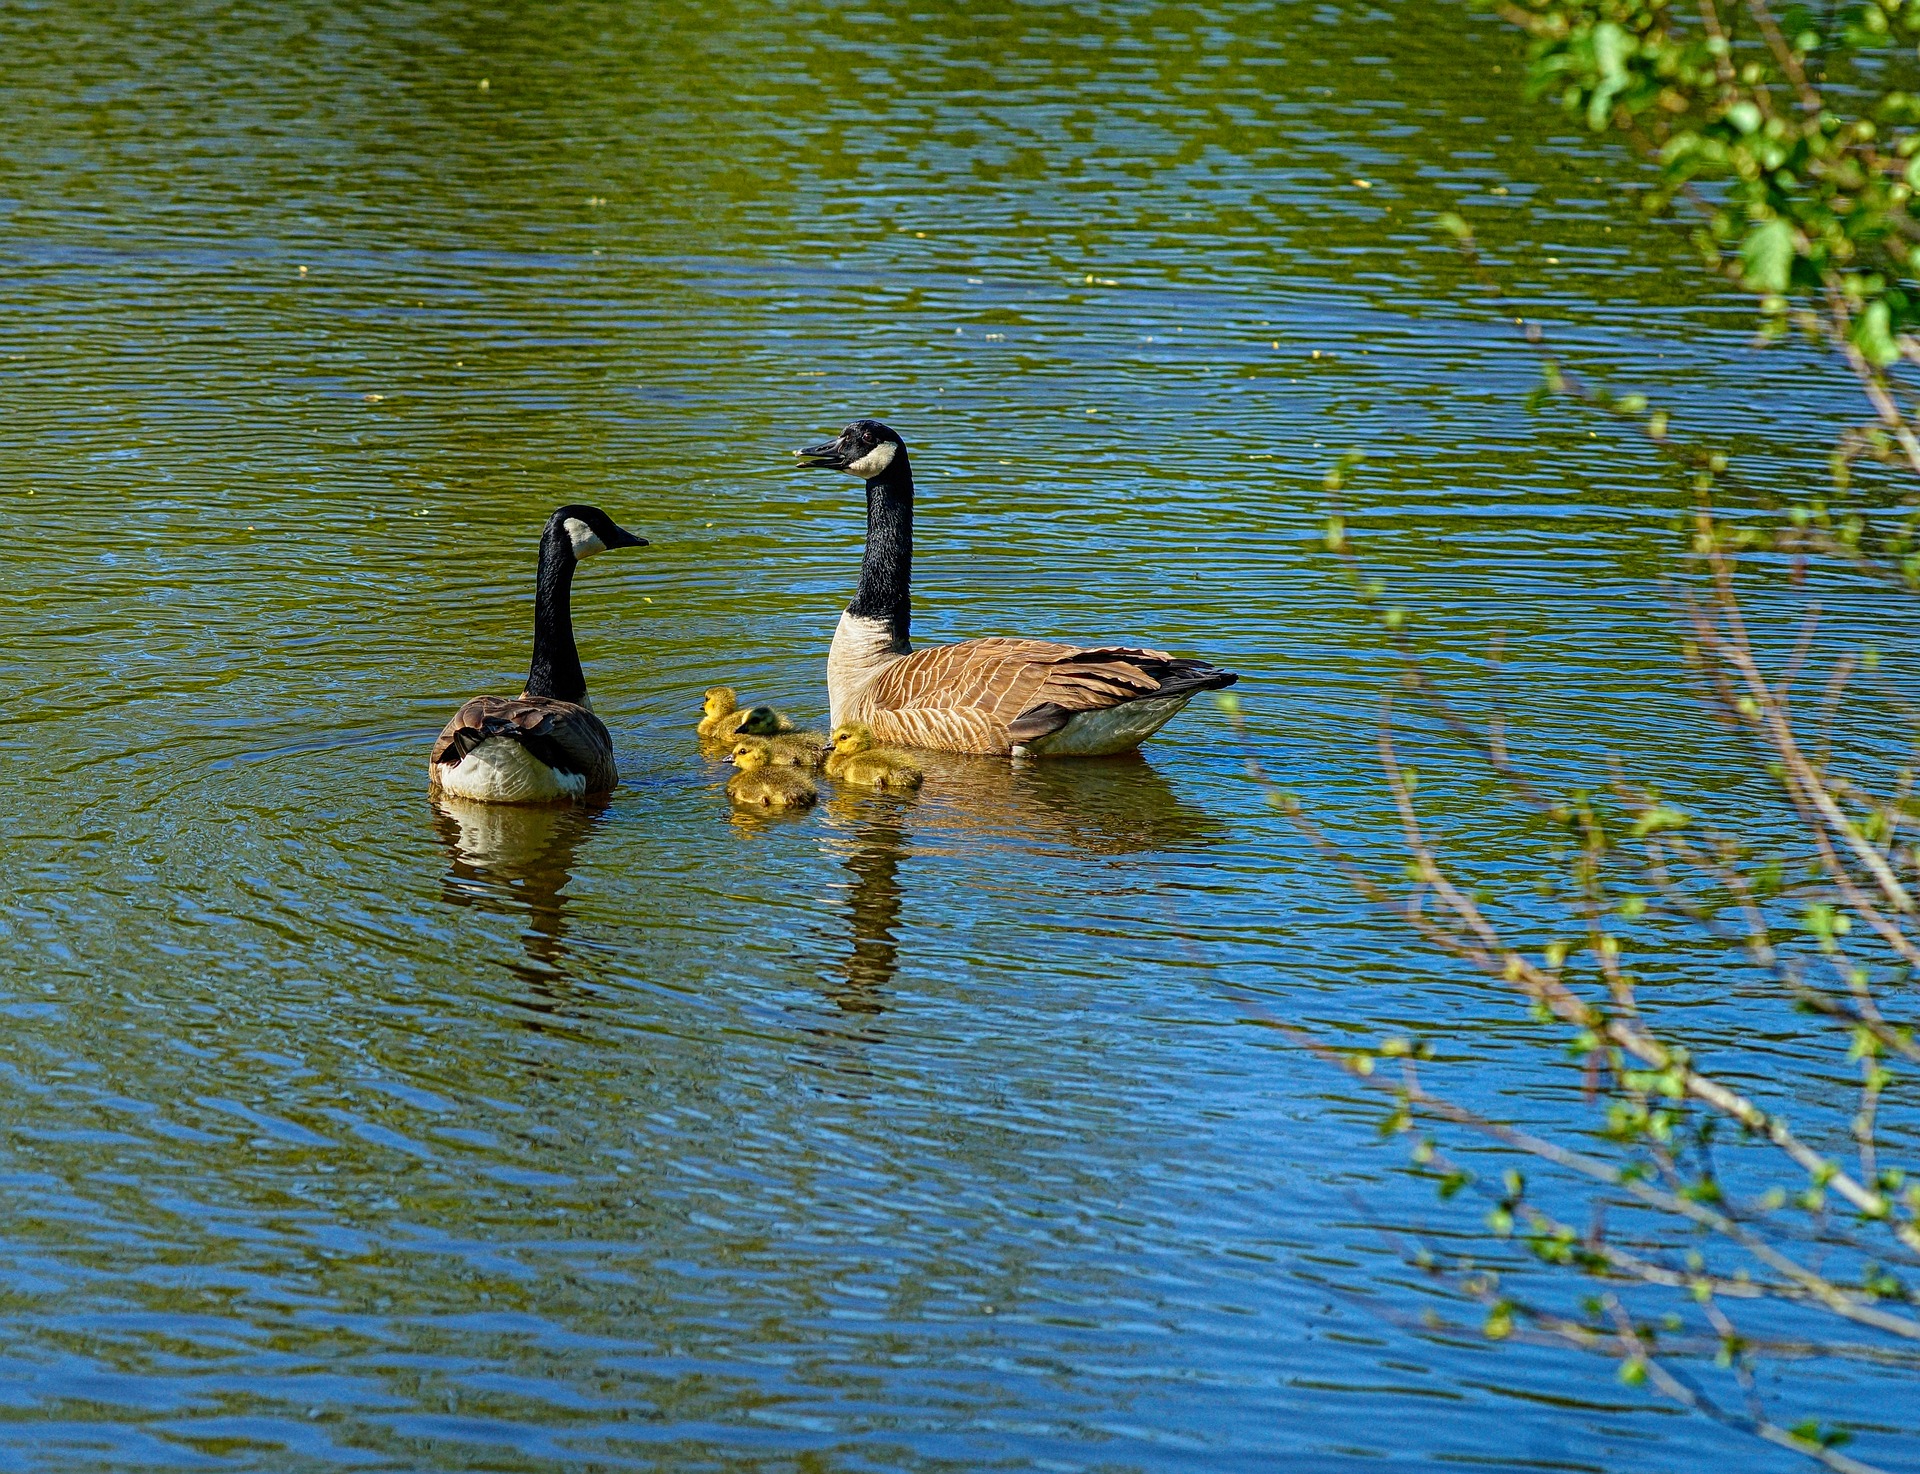 canada geese care for their young together